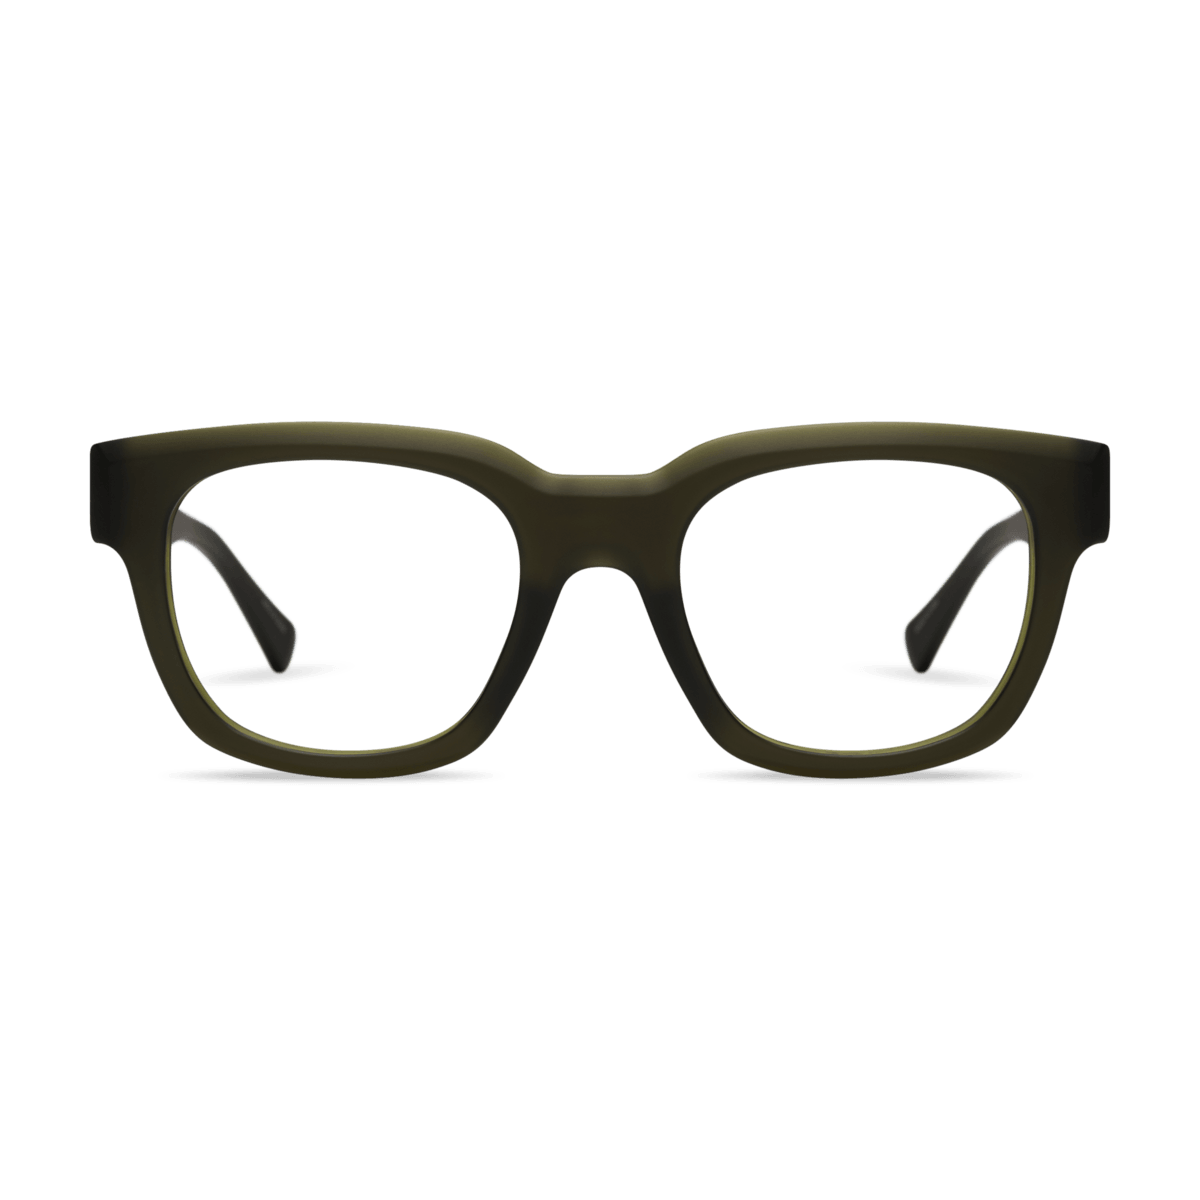 Kaine Readers READING GLASSES LOOK OPTIC (Forest Green) +1.00 